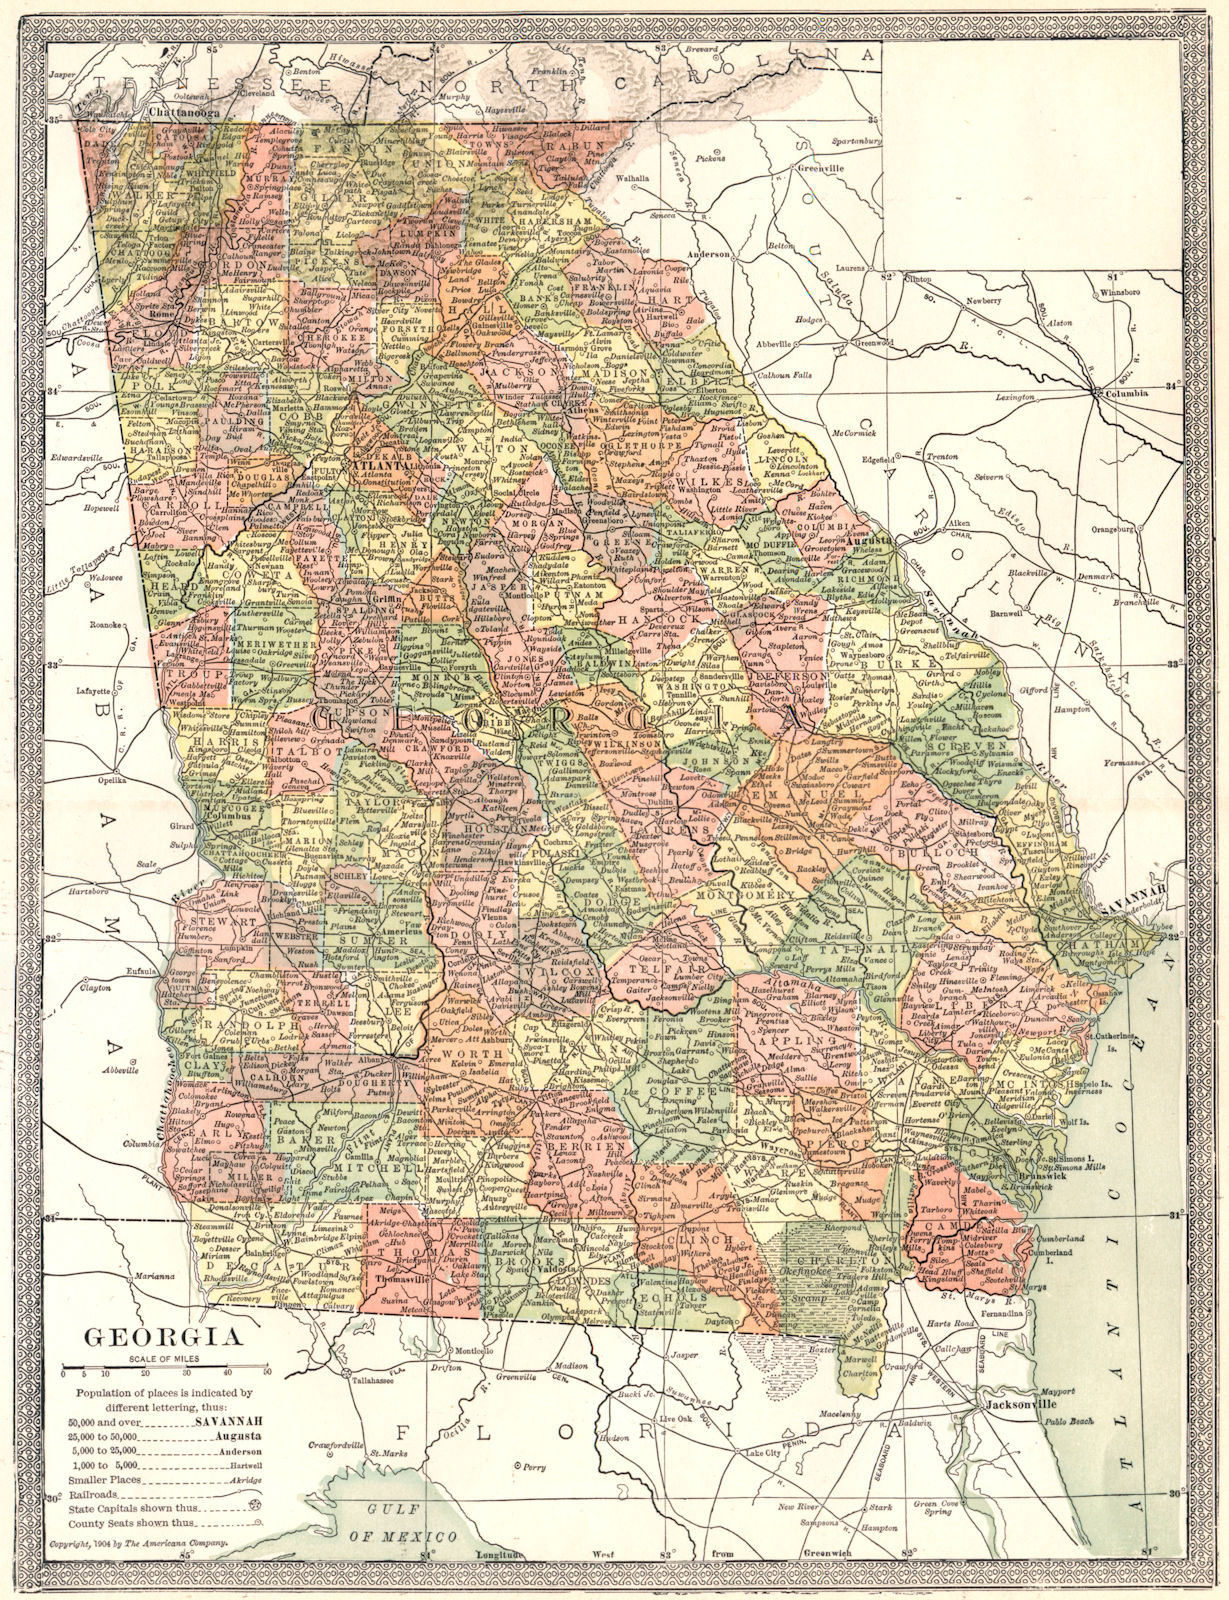 Associate Product GEORGIA state map. Counties 1907 old antique vintage plan chart